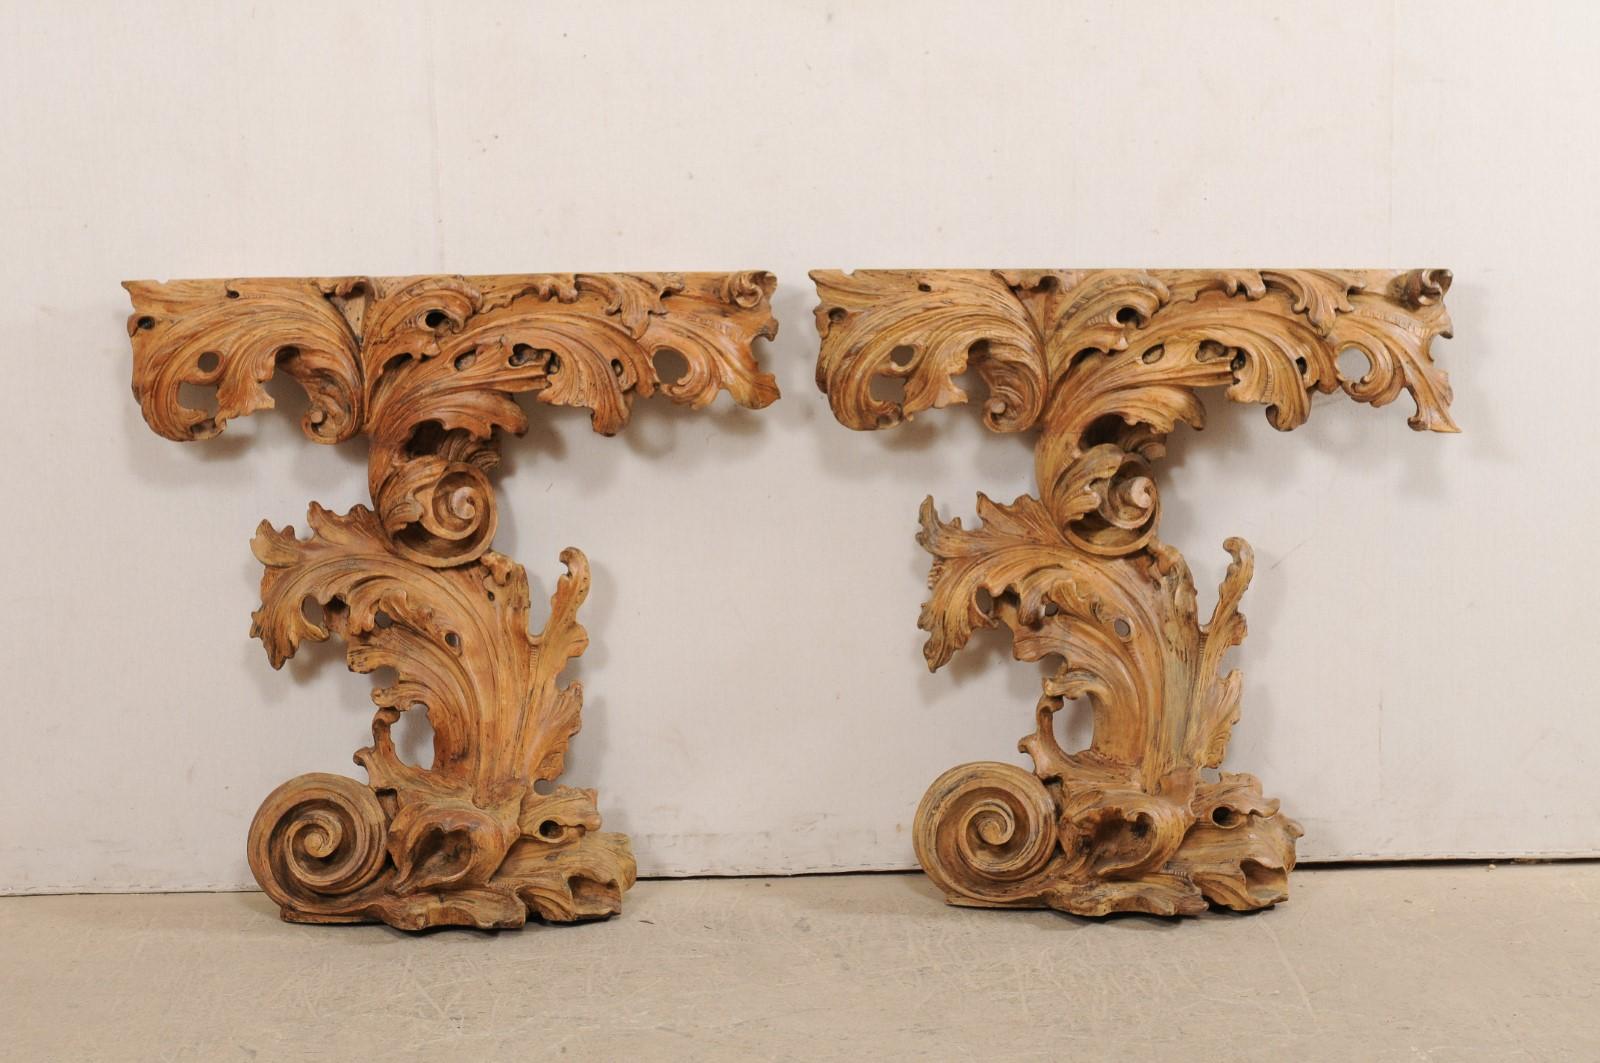 An Italian pair of ornately carved-wood and wall-mounted console tables. This pair of vintage tables from Italy are designed in an elaborate display of scrolling acanthus leaves and volutes. These tables have an elongated rectangular-shaped top,